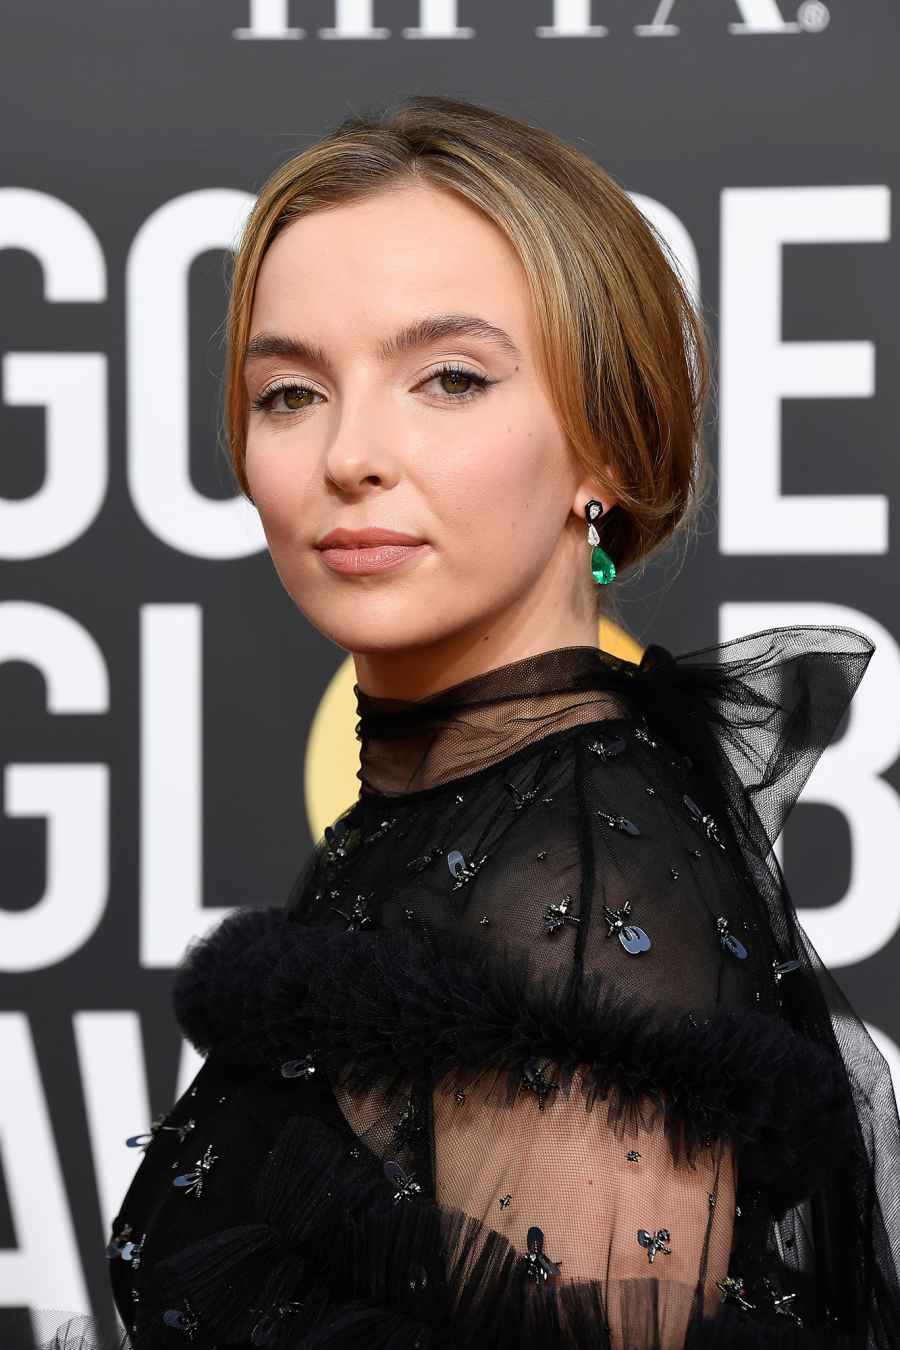 The Hottest Hair and Makeup on the 2019 Golden Globe Awards Red Carpet